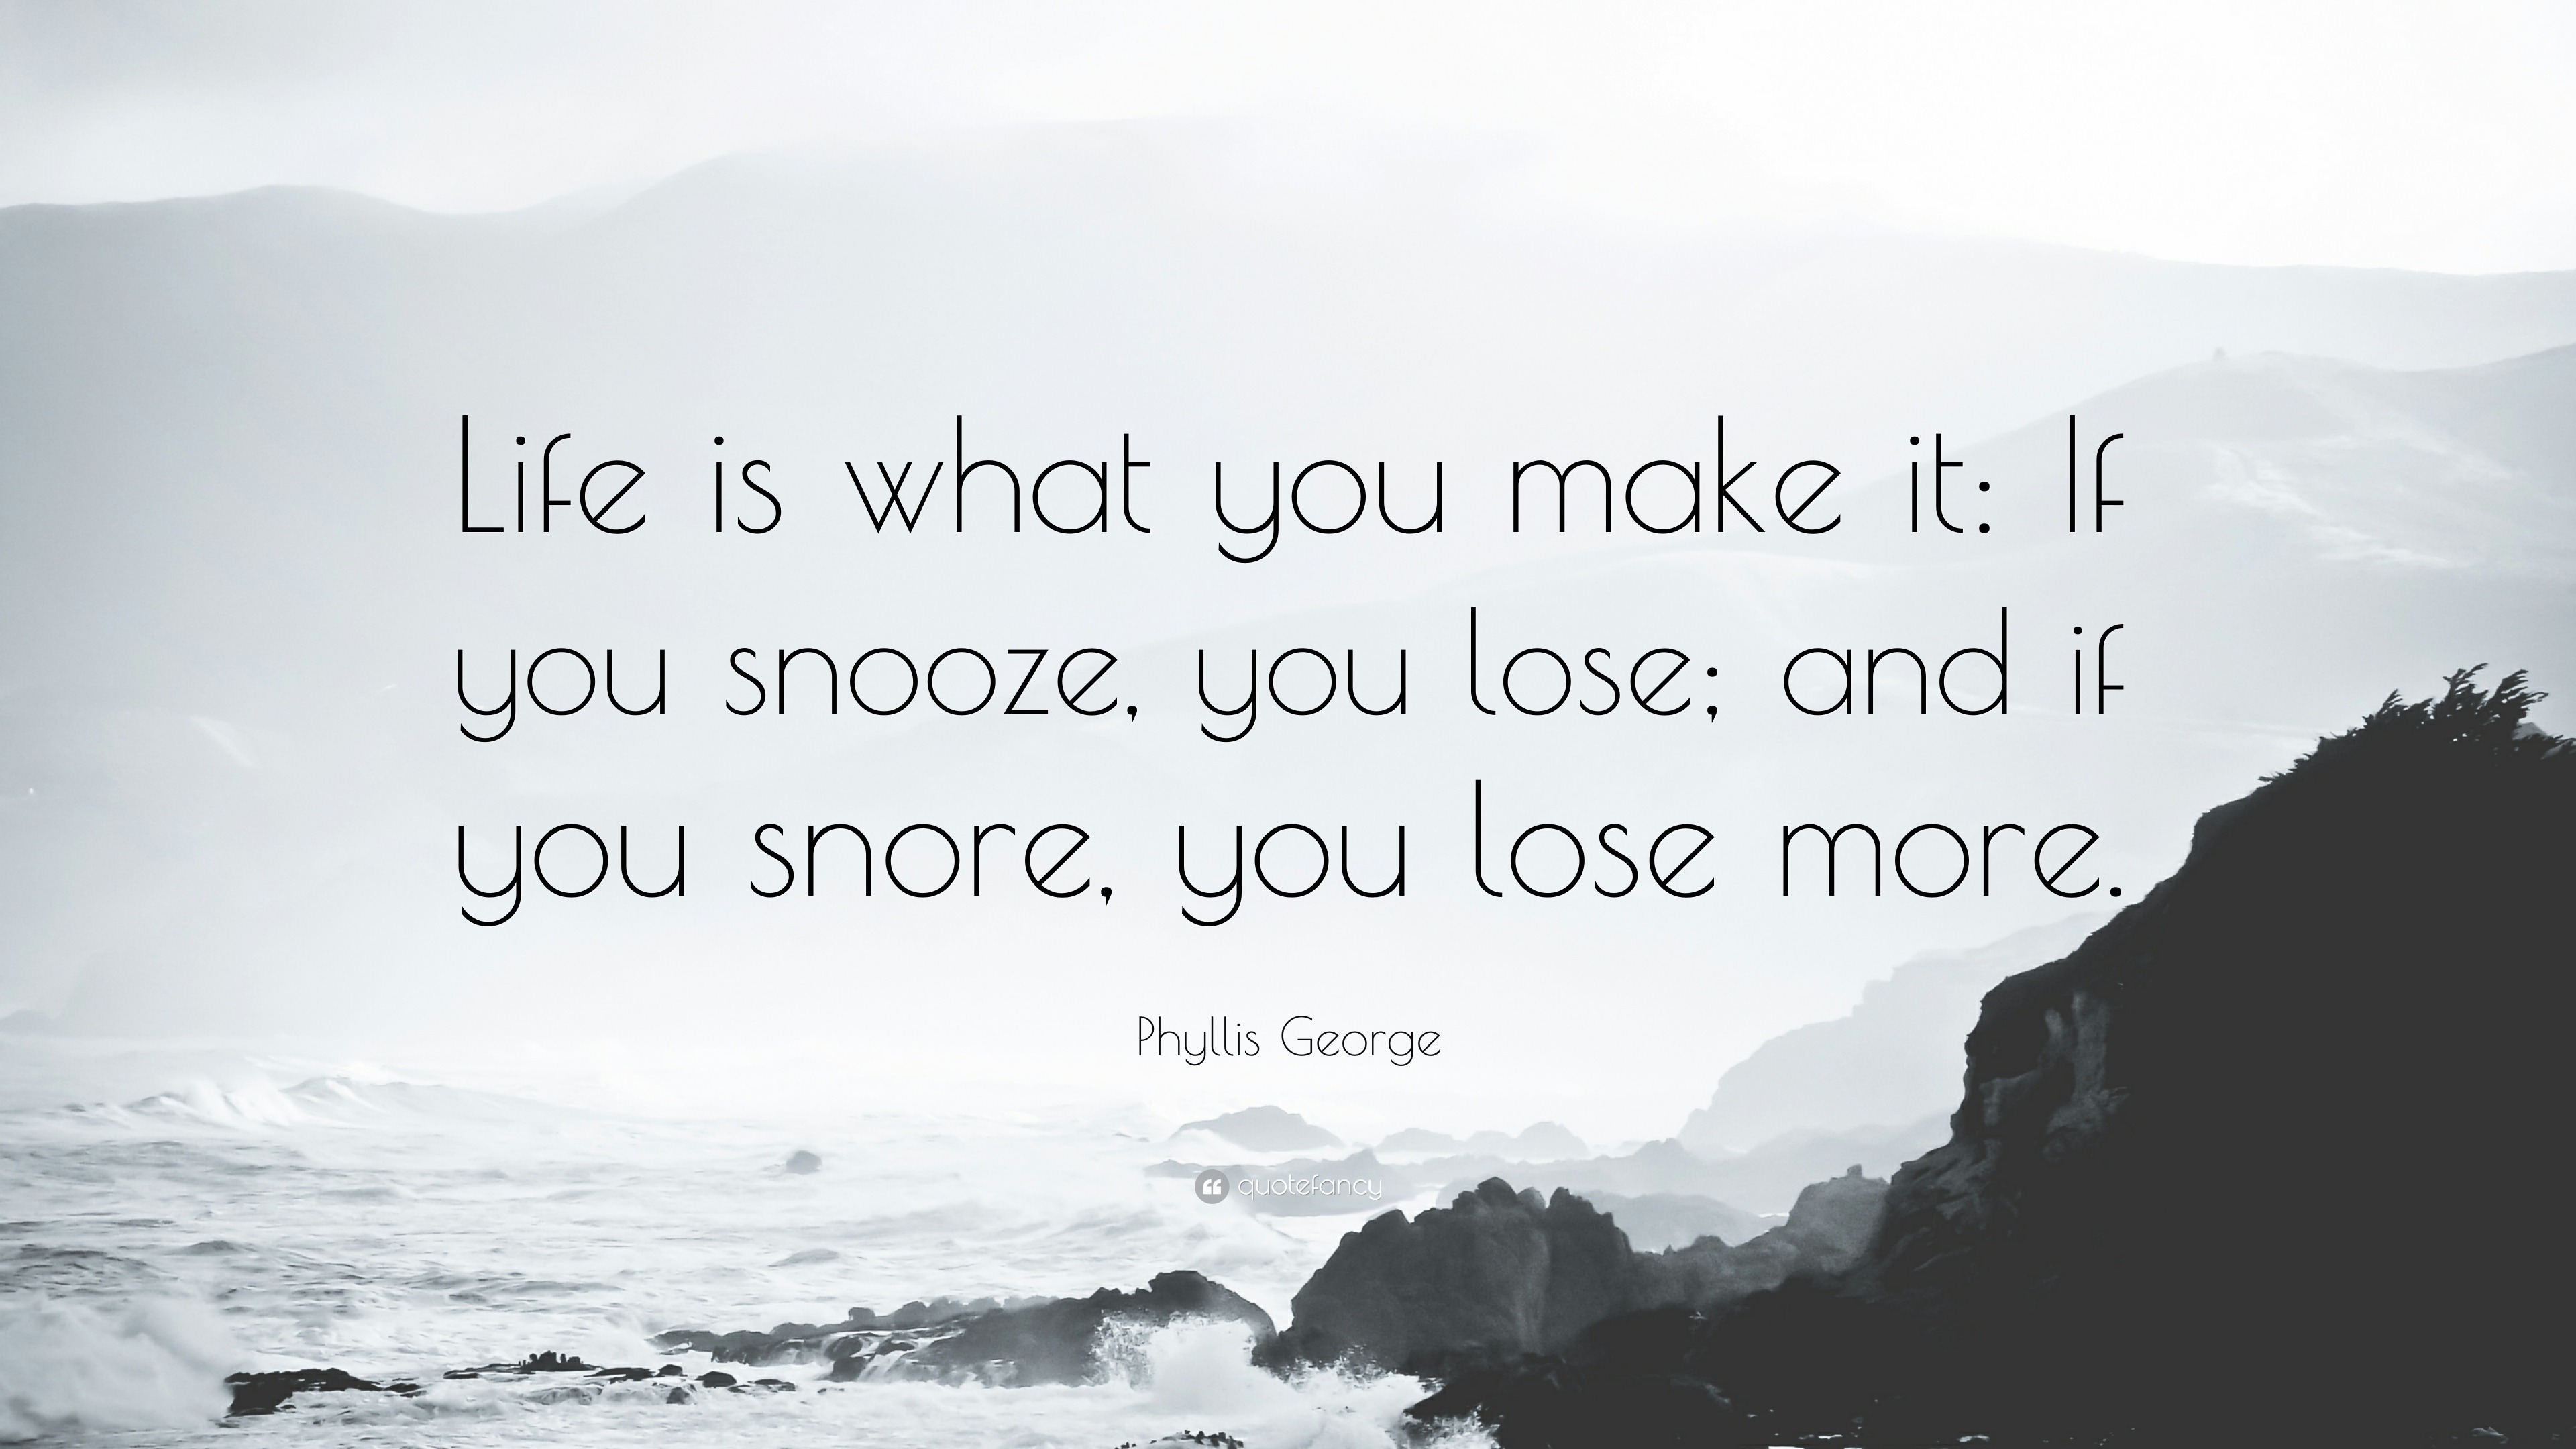 Phyllis George Quote Life Is What You Make It If You Snooze